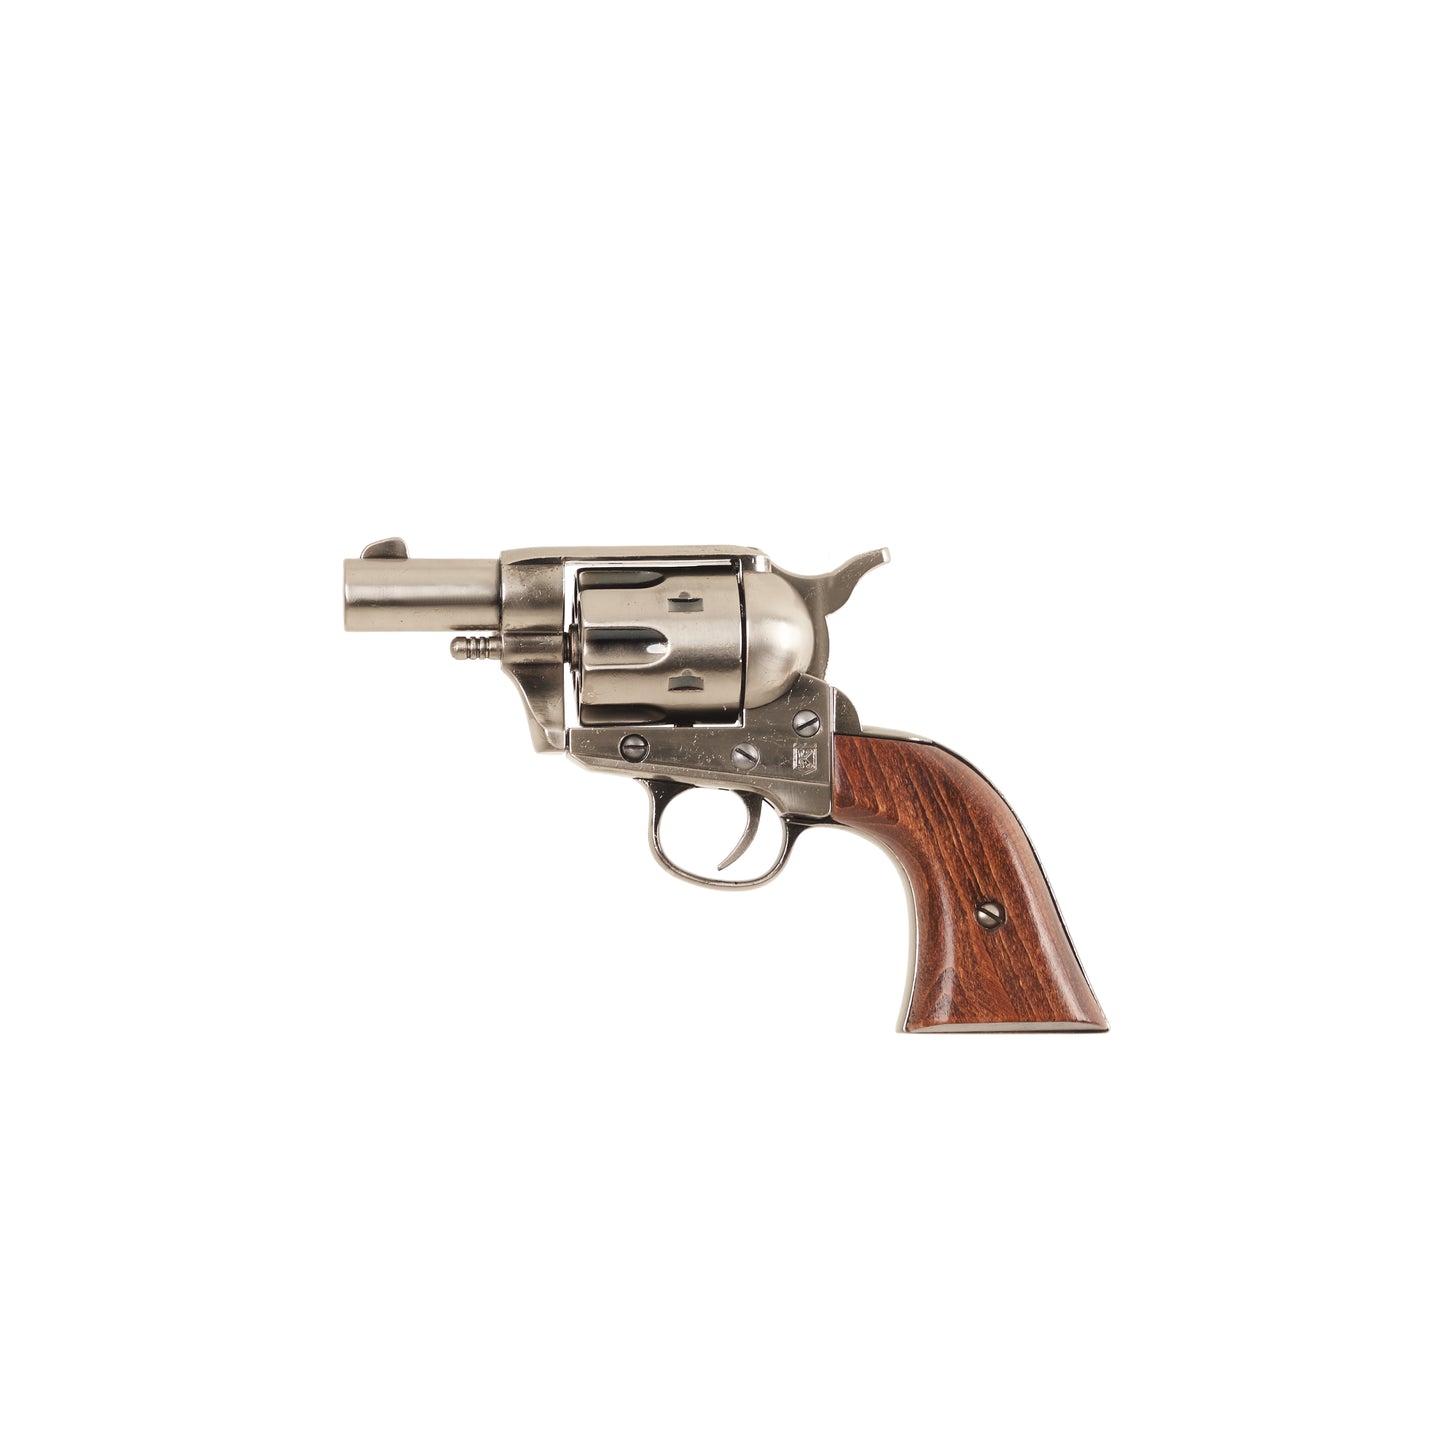 Left side view of polished nickel Non-Firing 1873 .45 Caliber Short Revolver with wood grip.